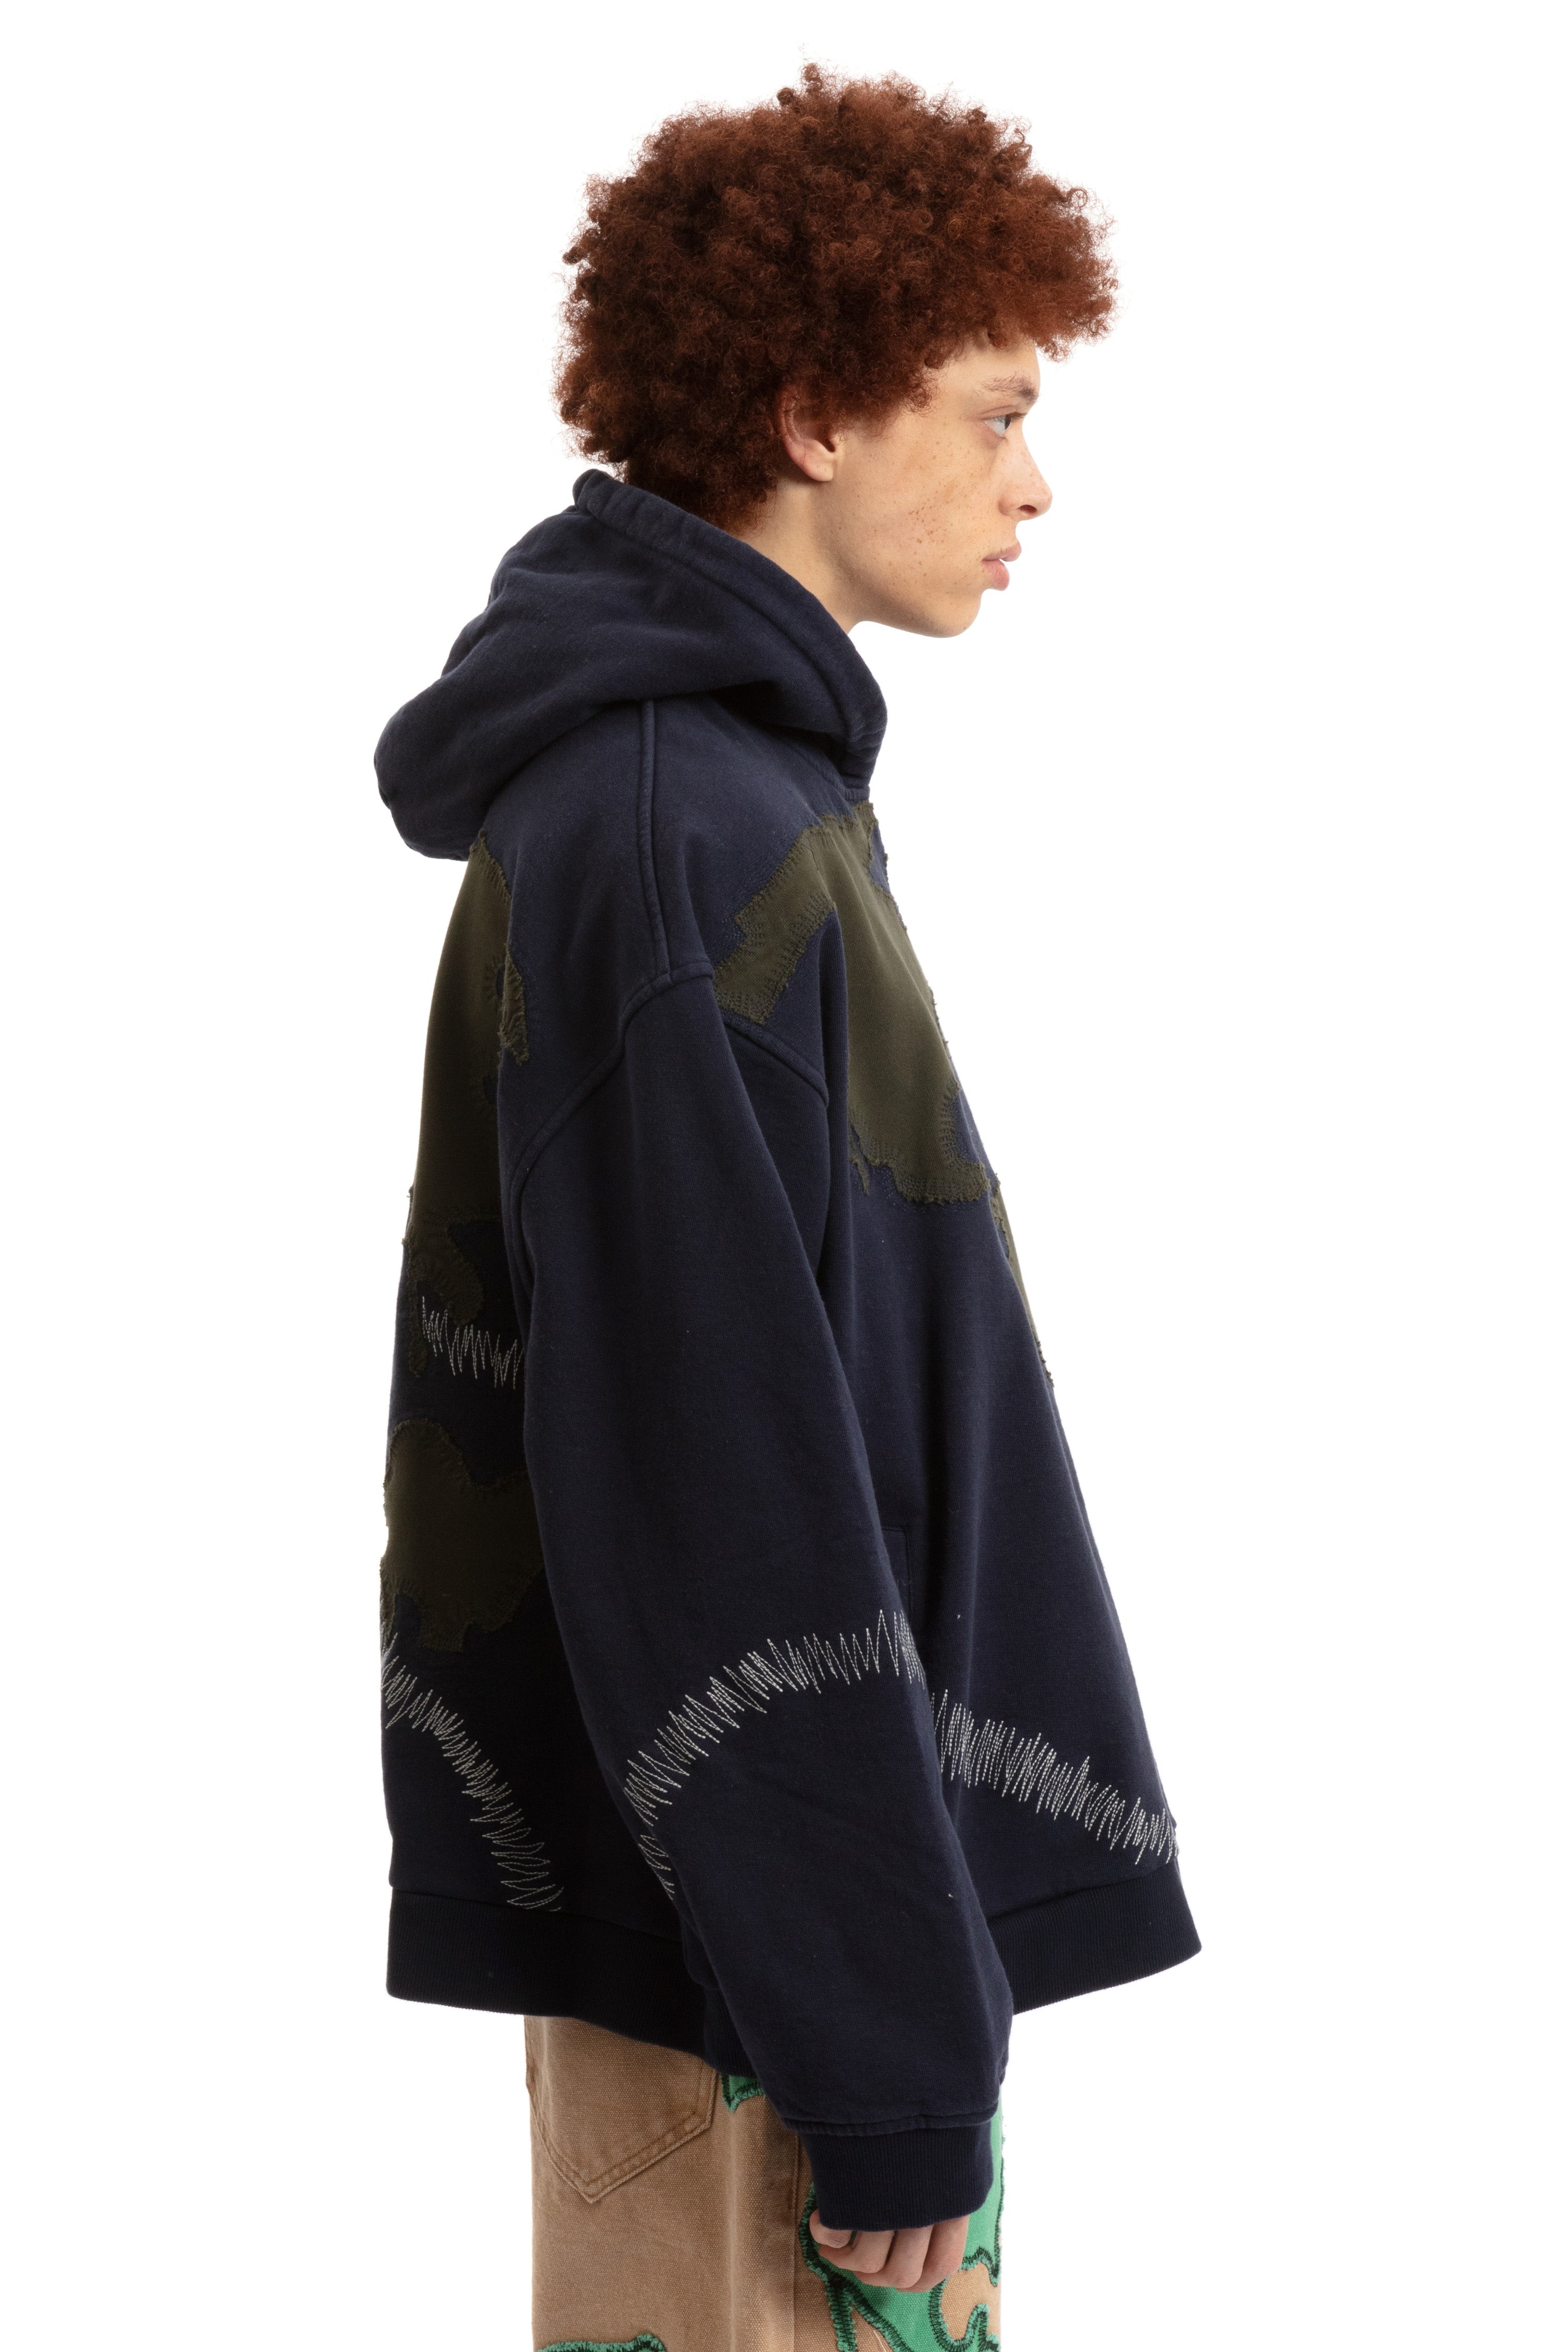 PANGIA HOODED PULLOVER